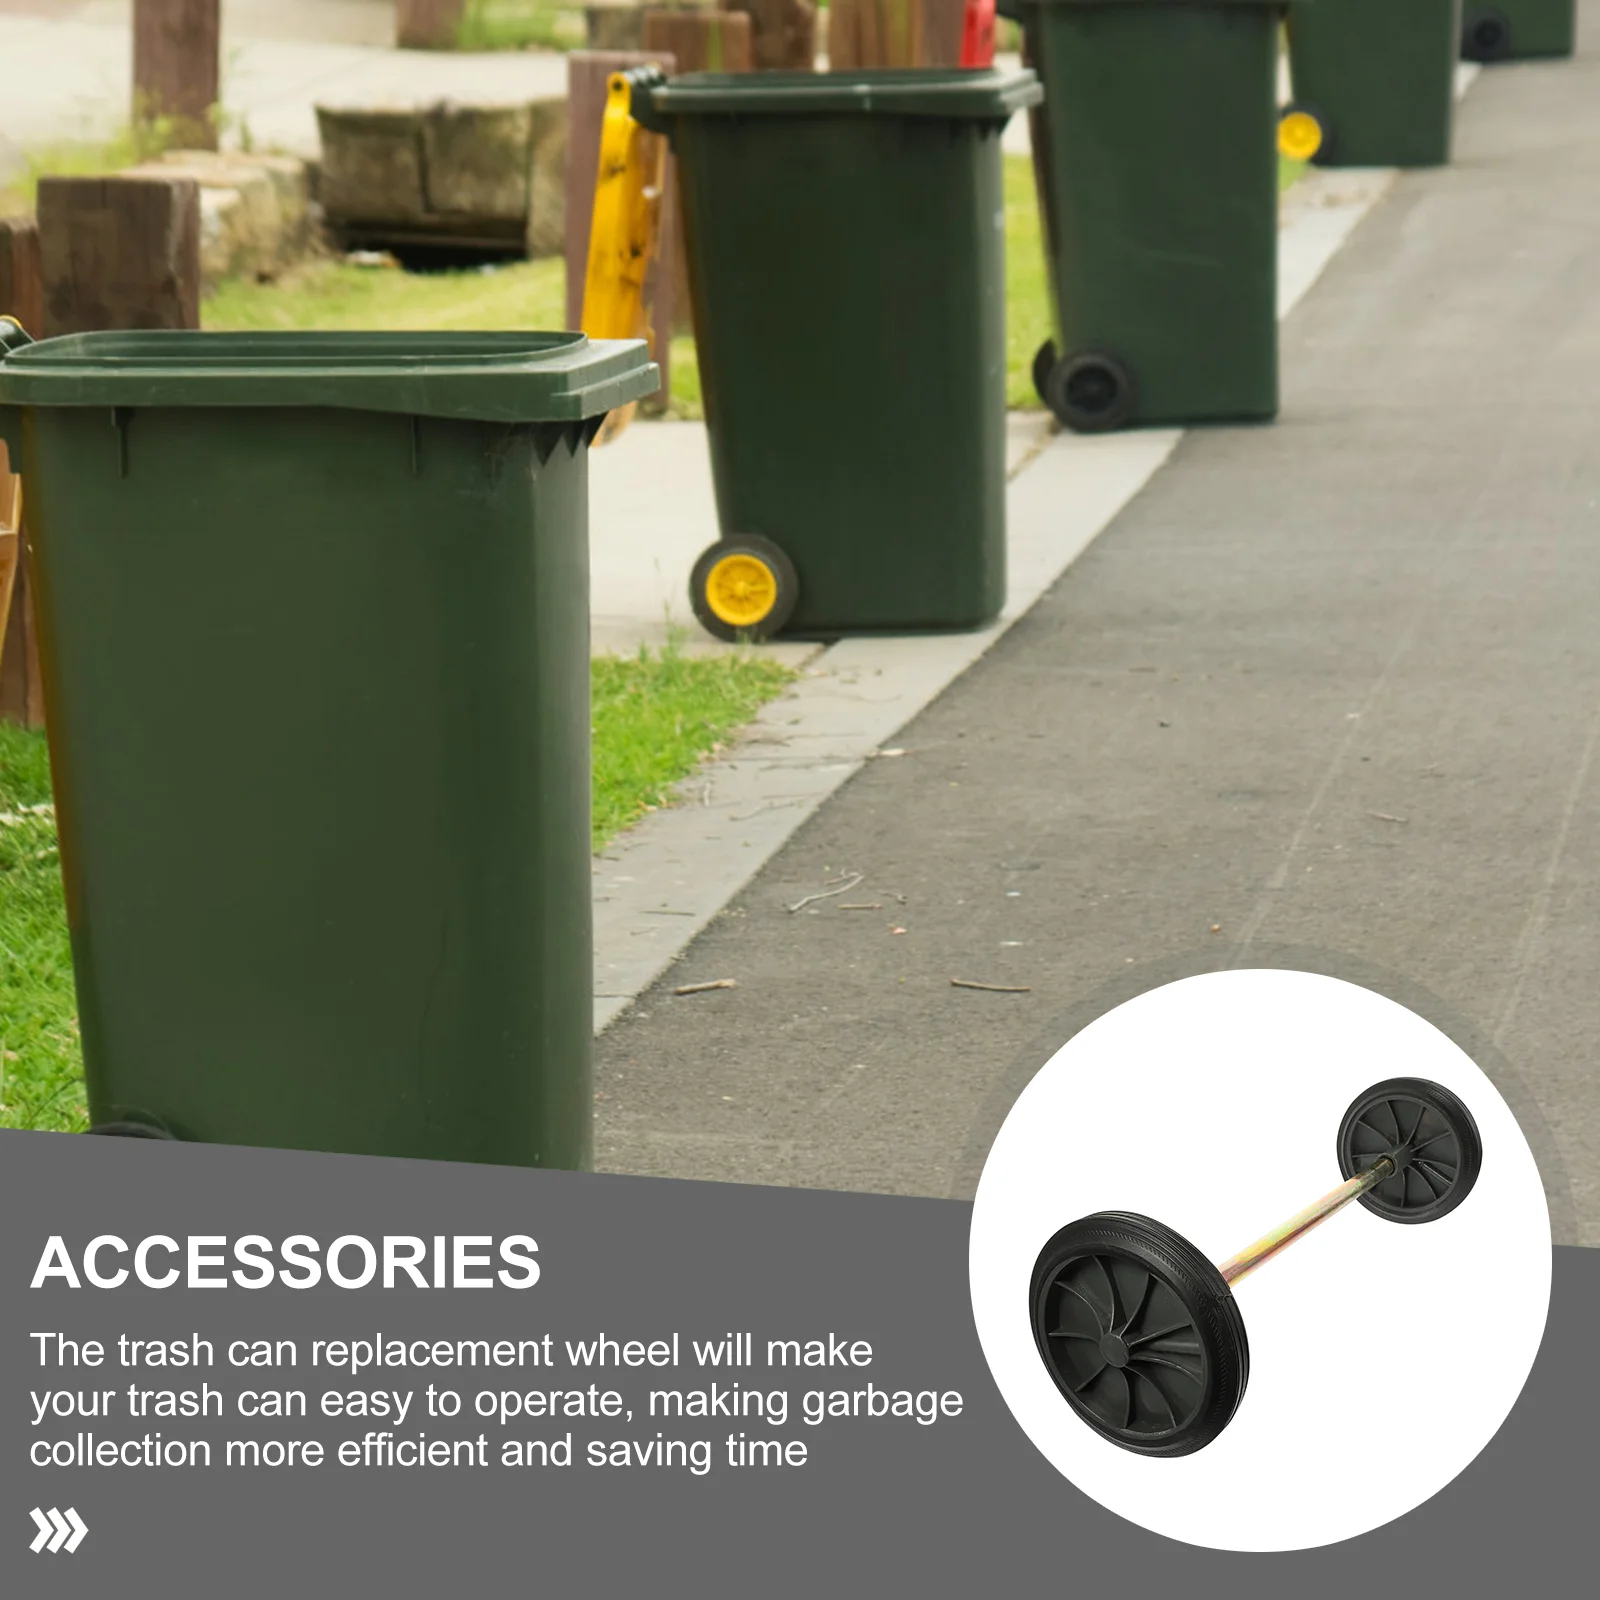 https://ae01.alicdn.com/kf/S7351b06e59014bd8b62ac96c03de07c19/Garbage-Cans-Outdoor-Trash-Can-Covered-Moving-Wheels-Wheeled-Garbage-Pulley-Plastic-Outdoor-Repair-Tools.jpg